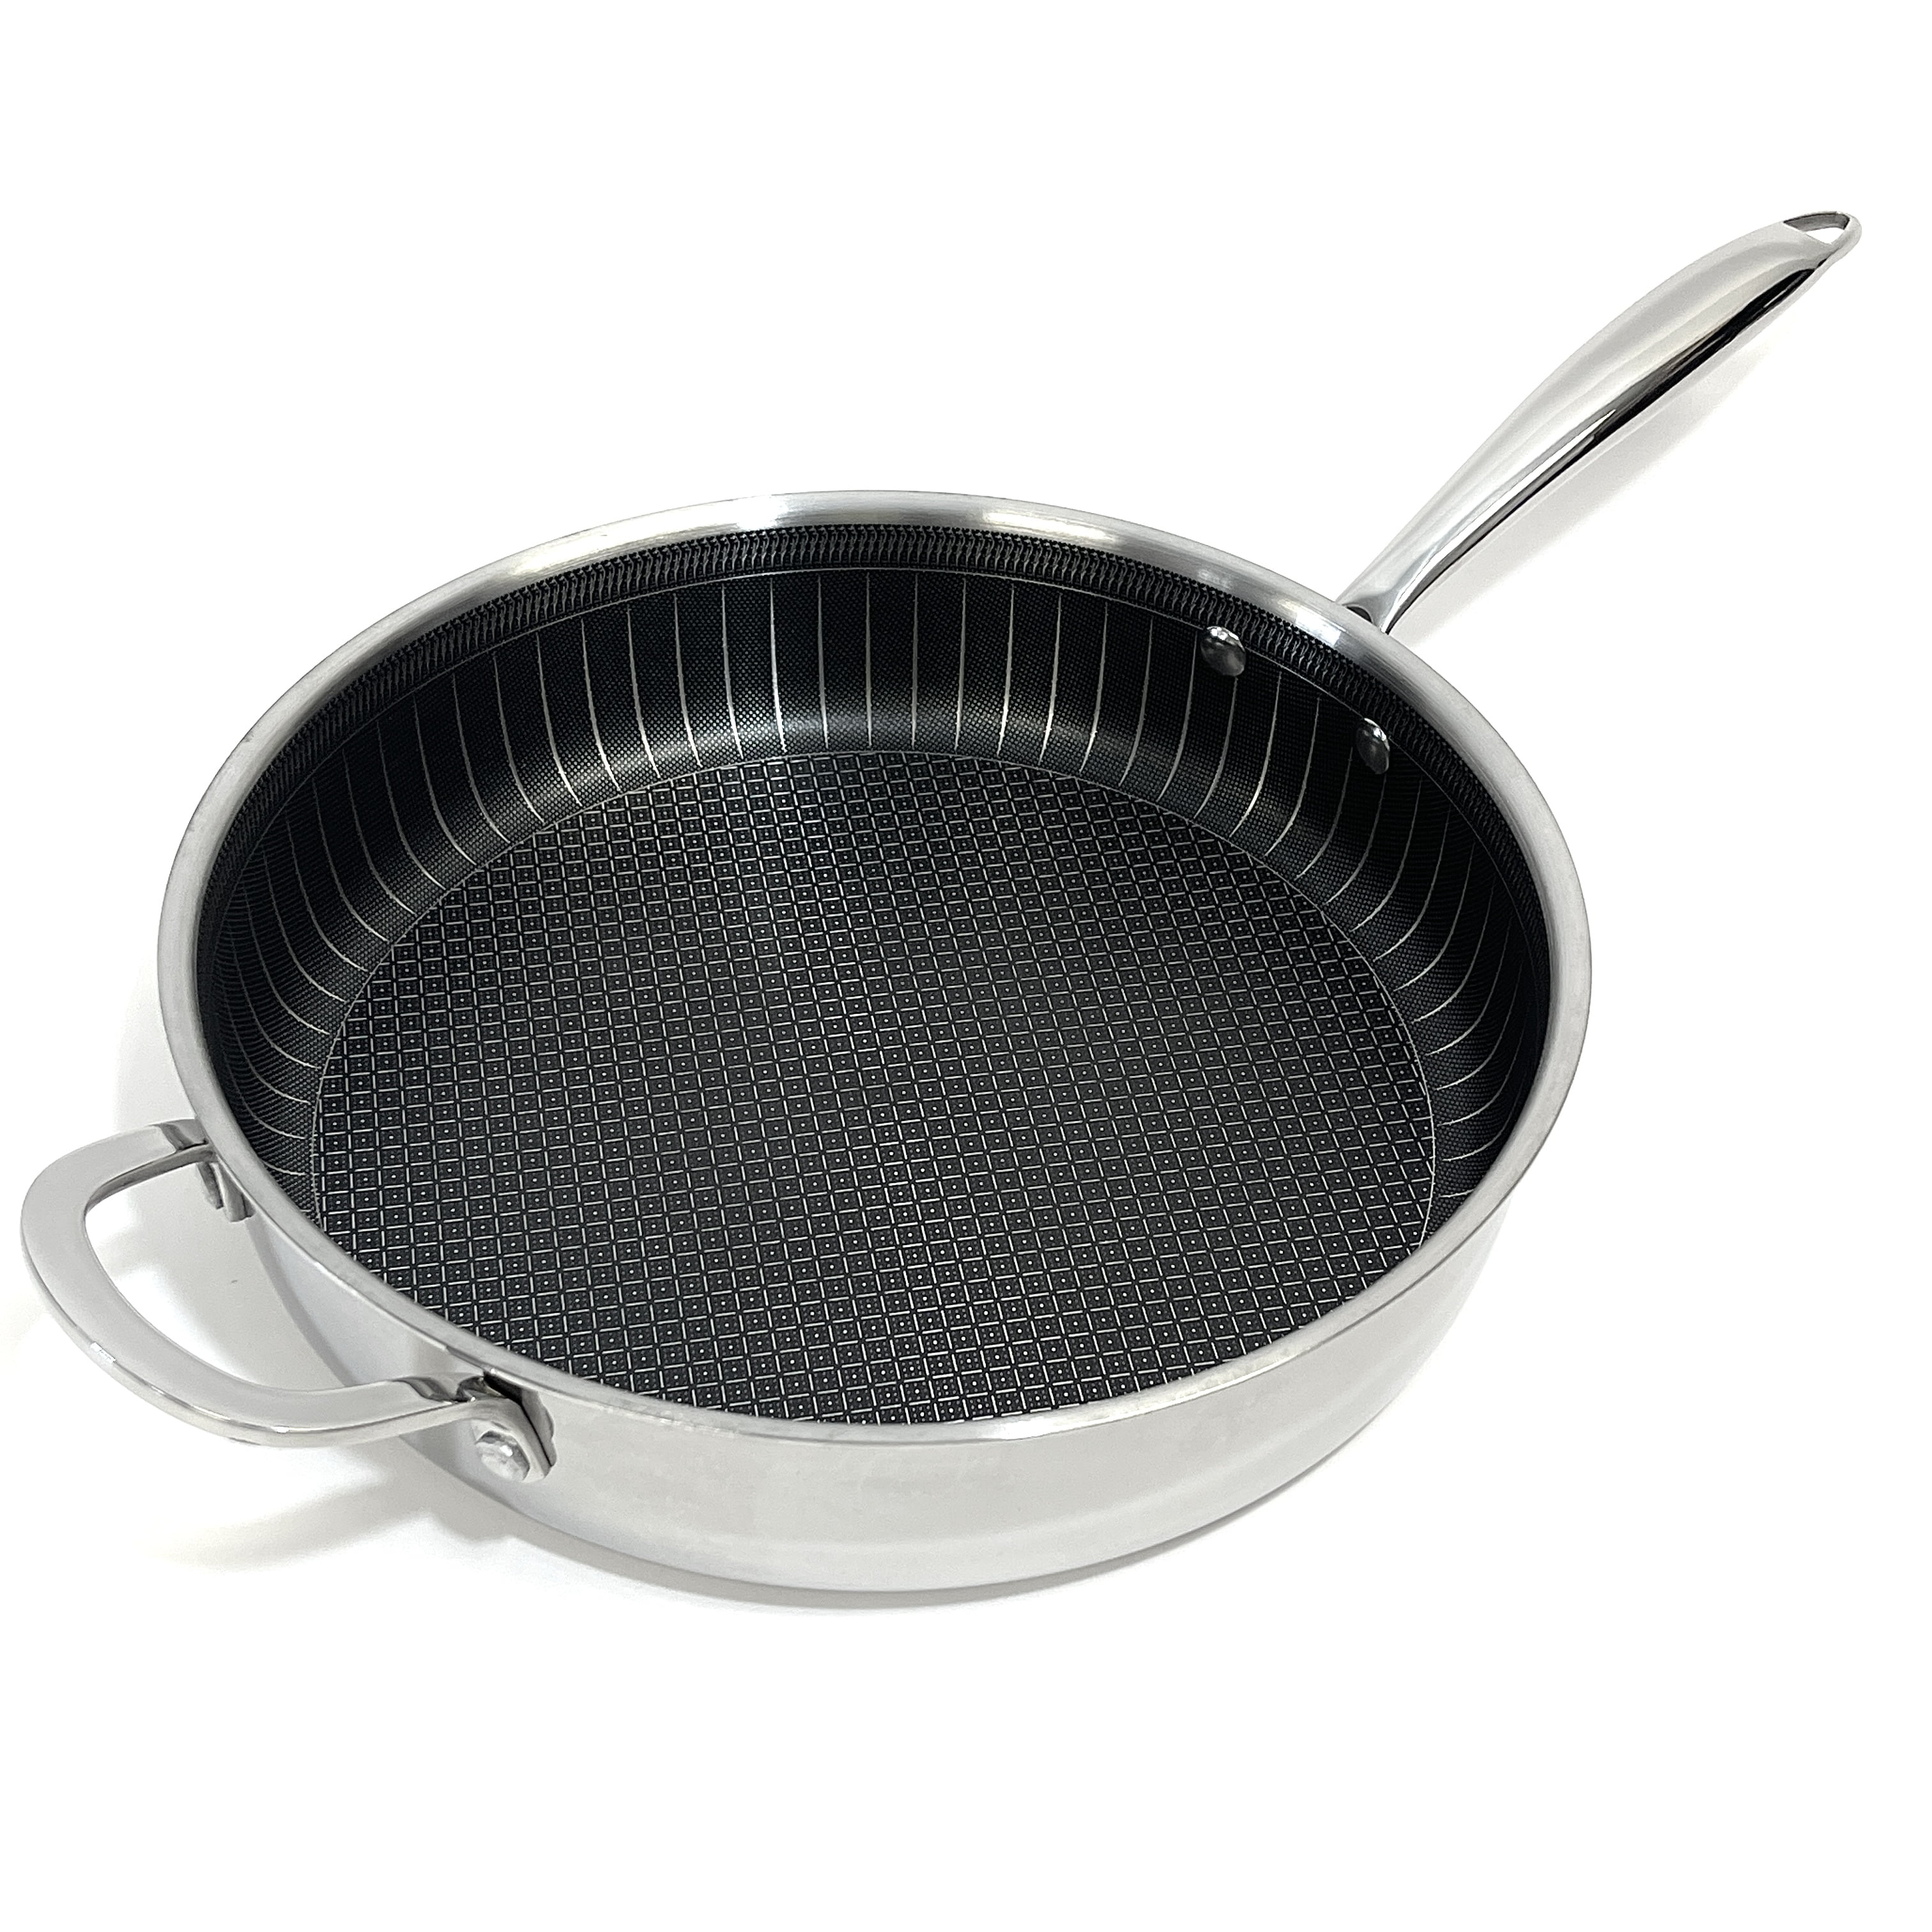 DELUXE Stainless Steel Pan Nonstick Skillet,10 Inch Frying Pans with 6.3″  burger press, Professtional 3-ply Cooking Pan withfor Induction Electric  Gas Ceramic Stoves, Dishwasher Oven Safe - Coupon Codes, Promo Codes, Daily